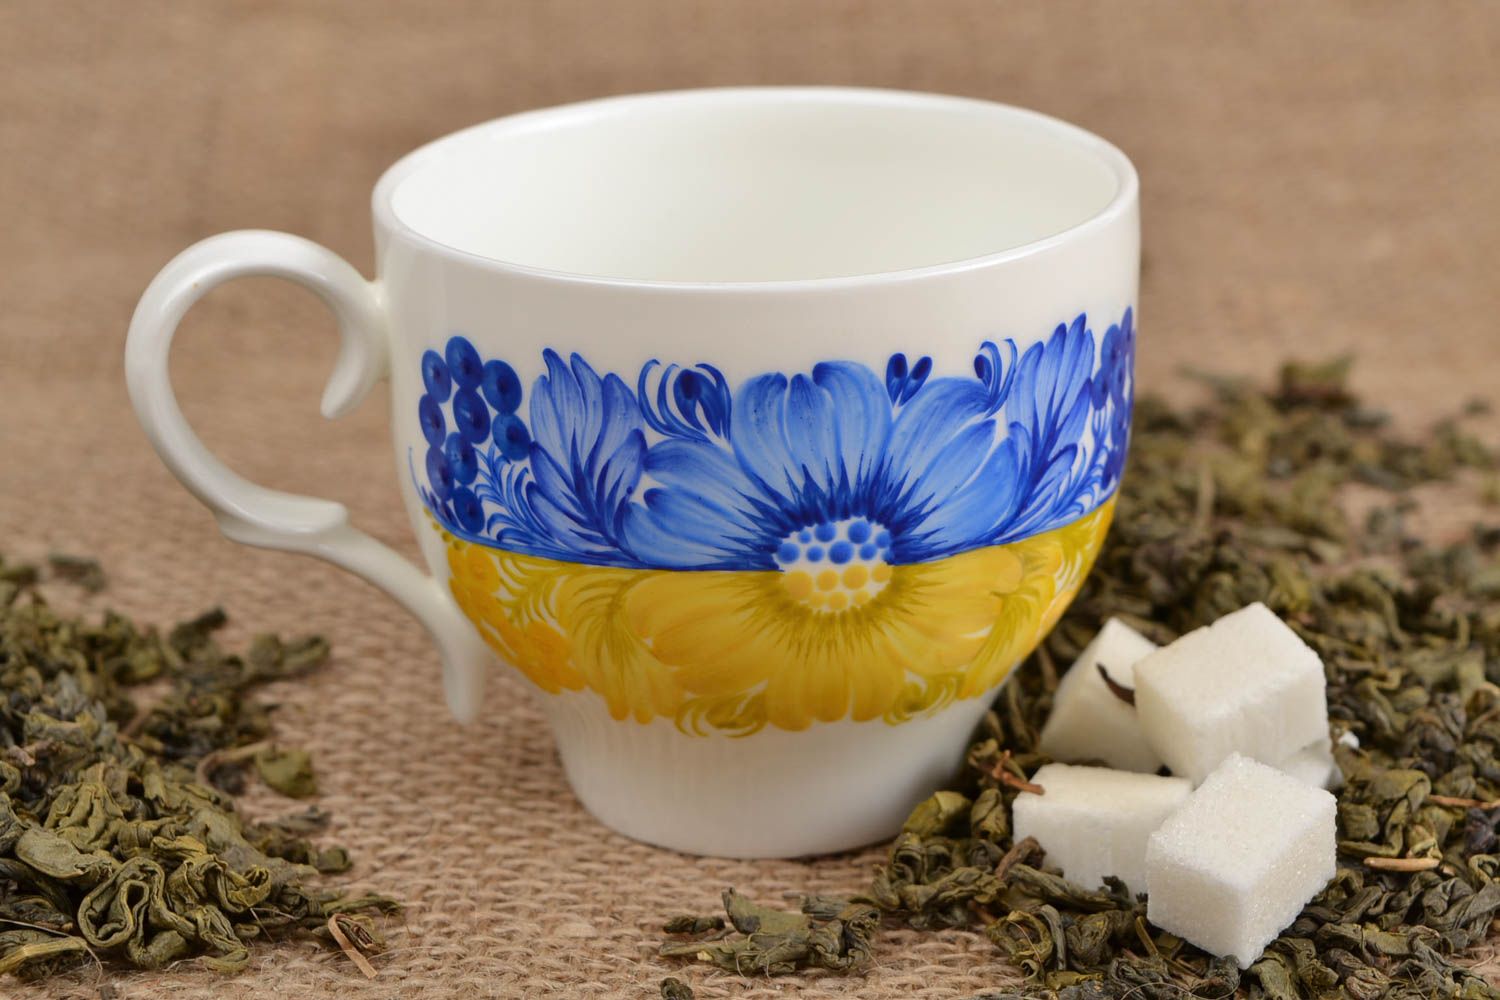 Porcelain teacup in white, yellow, and blue color with handle photo 1